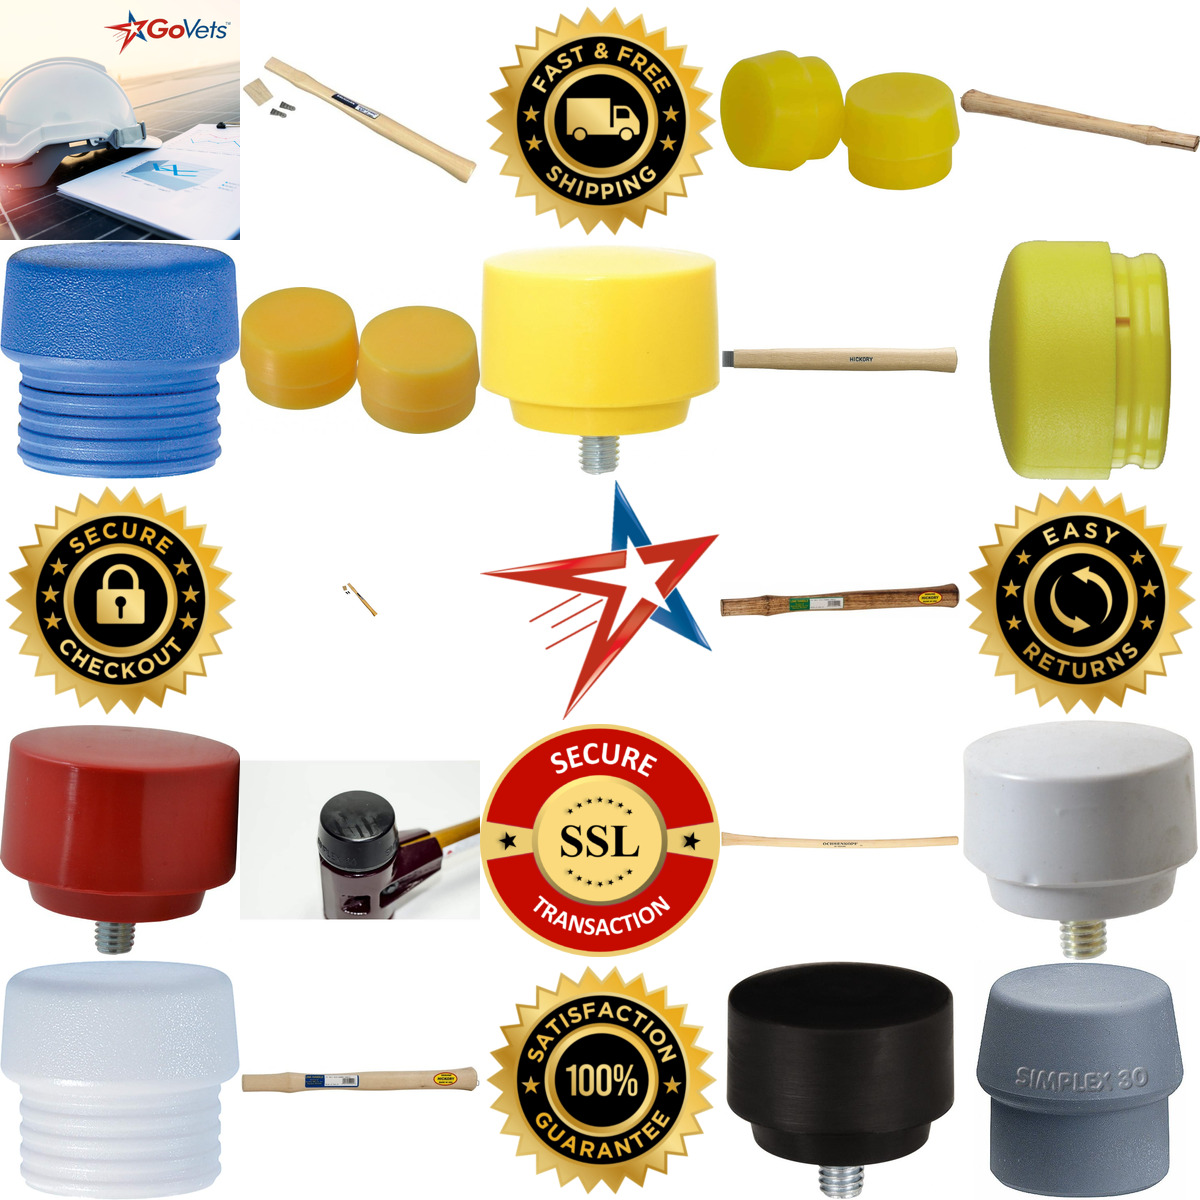 A selection of Replacement Handles Heads and Faces products on GoVets